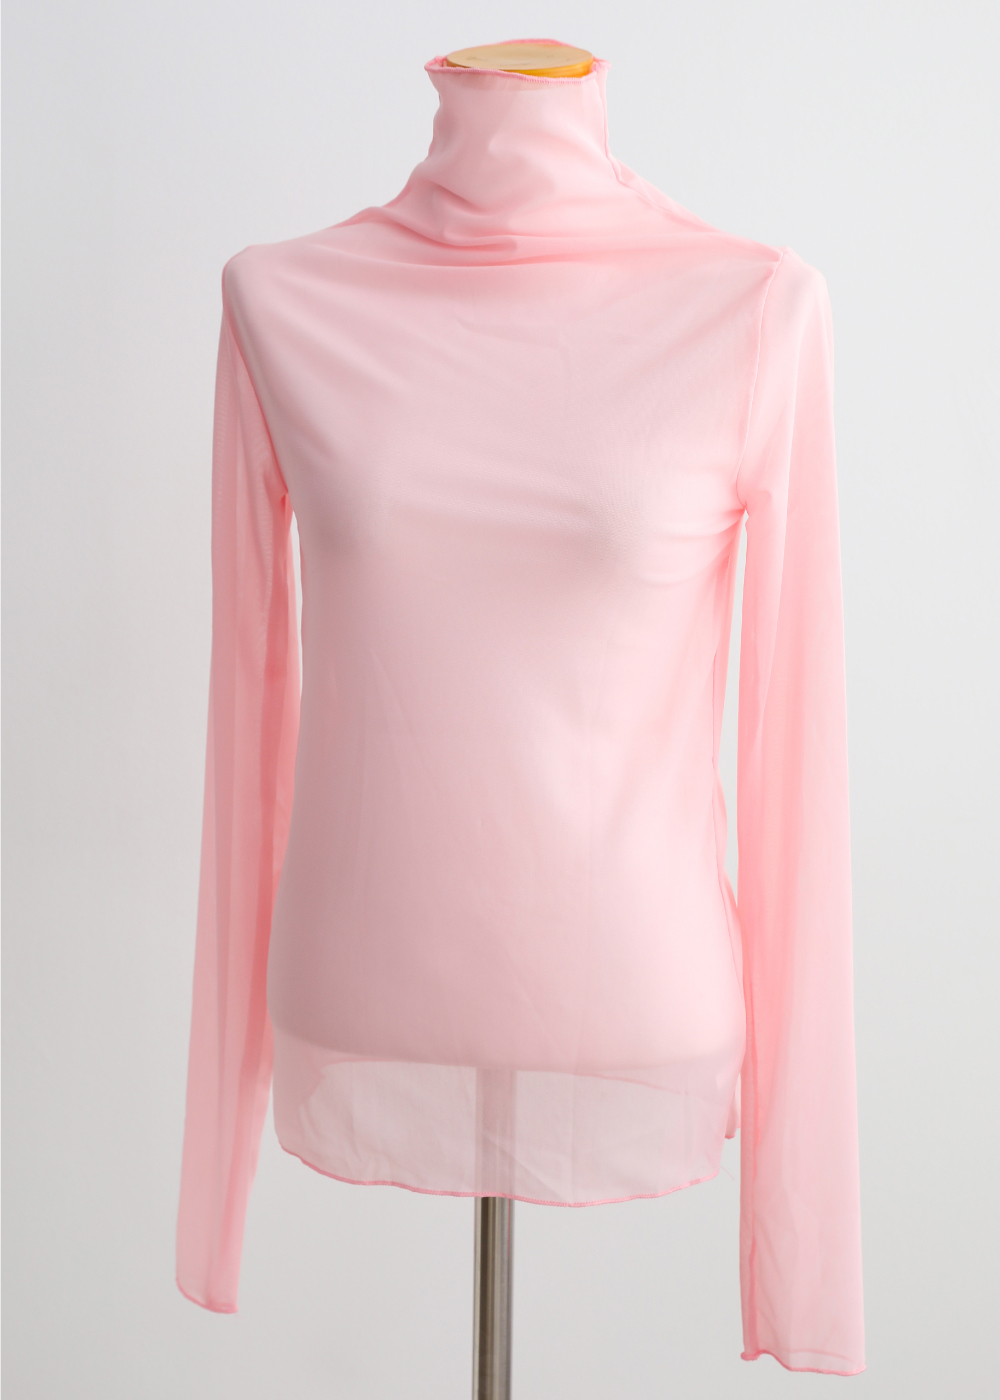 long sleeved tee baby pink color image-S1L32